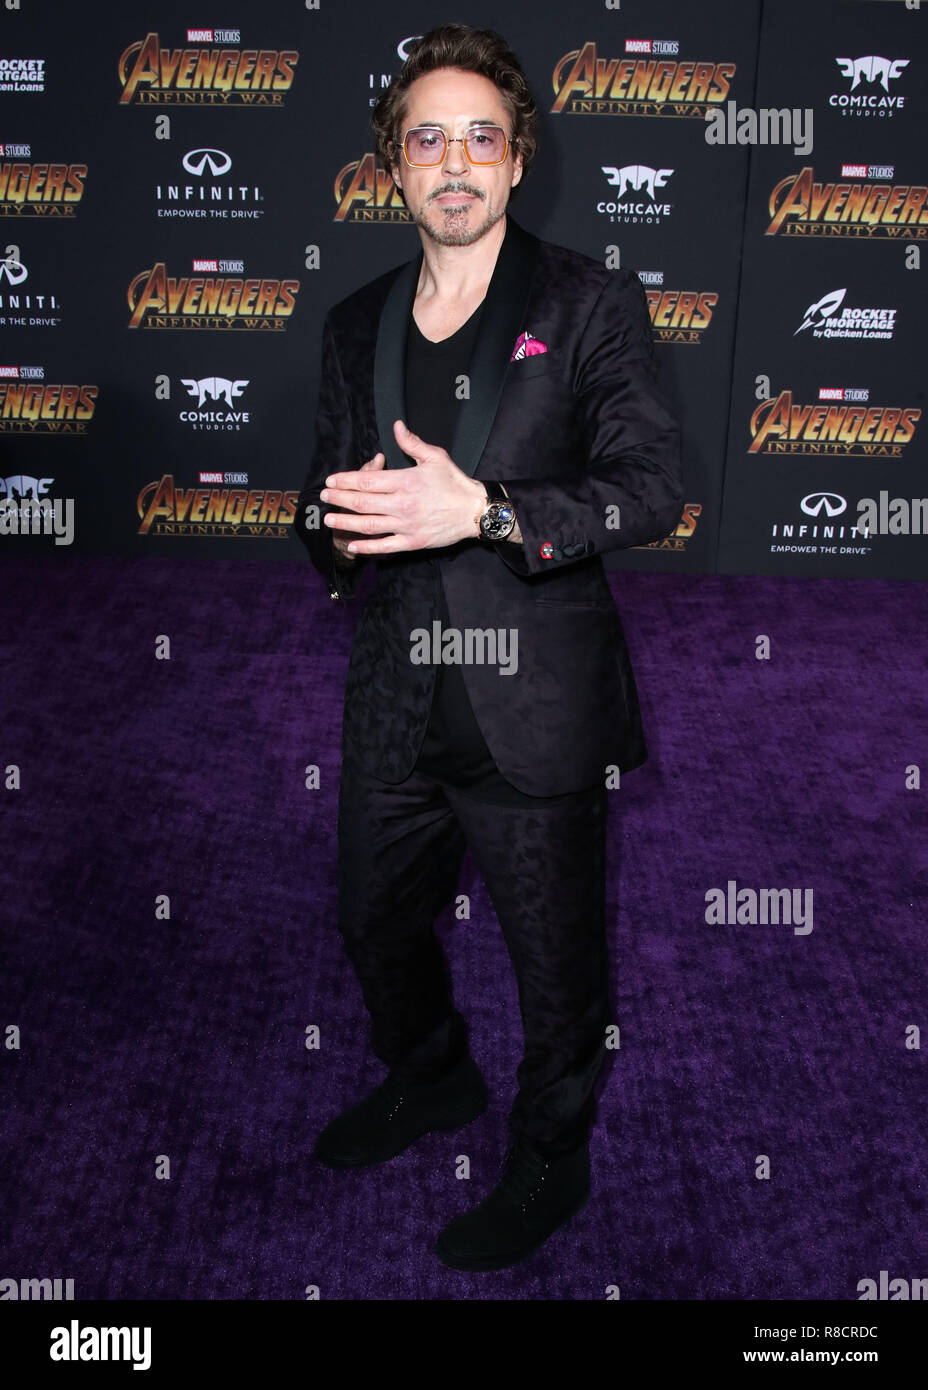 HOLLYWOOD, LOS ANGELES, CA, USA - APRIL 23: Robert Downey Jr. at the World Premiere Of Disney And Marvel's 'Avengers: Infinity War' held at the El Capitan Theatre, Dolby Theatre and TCL Chinese Theatre IMAX on April 23, 2018 in Hollywood, Los Angeles, California, United States. (Photo by Xavier Collin/Image Press Agency) Stock Photo